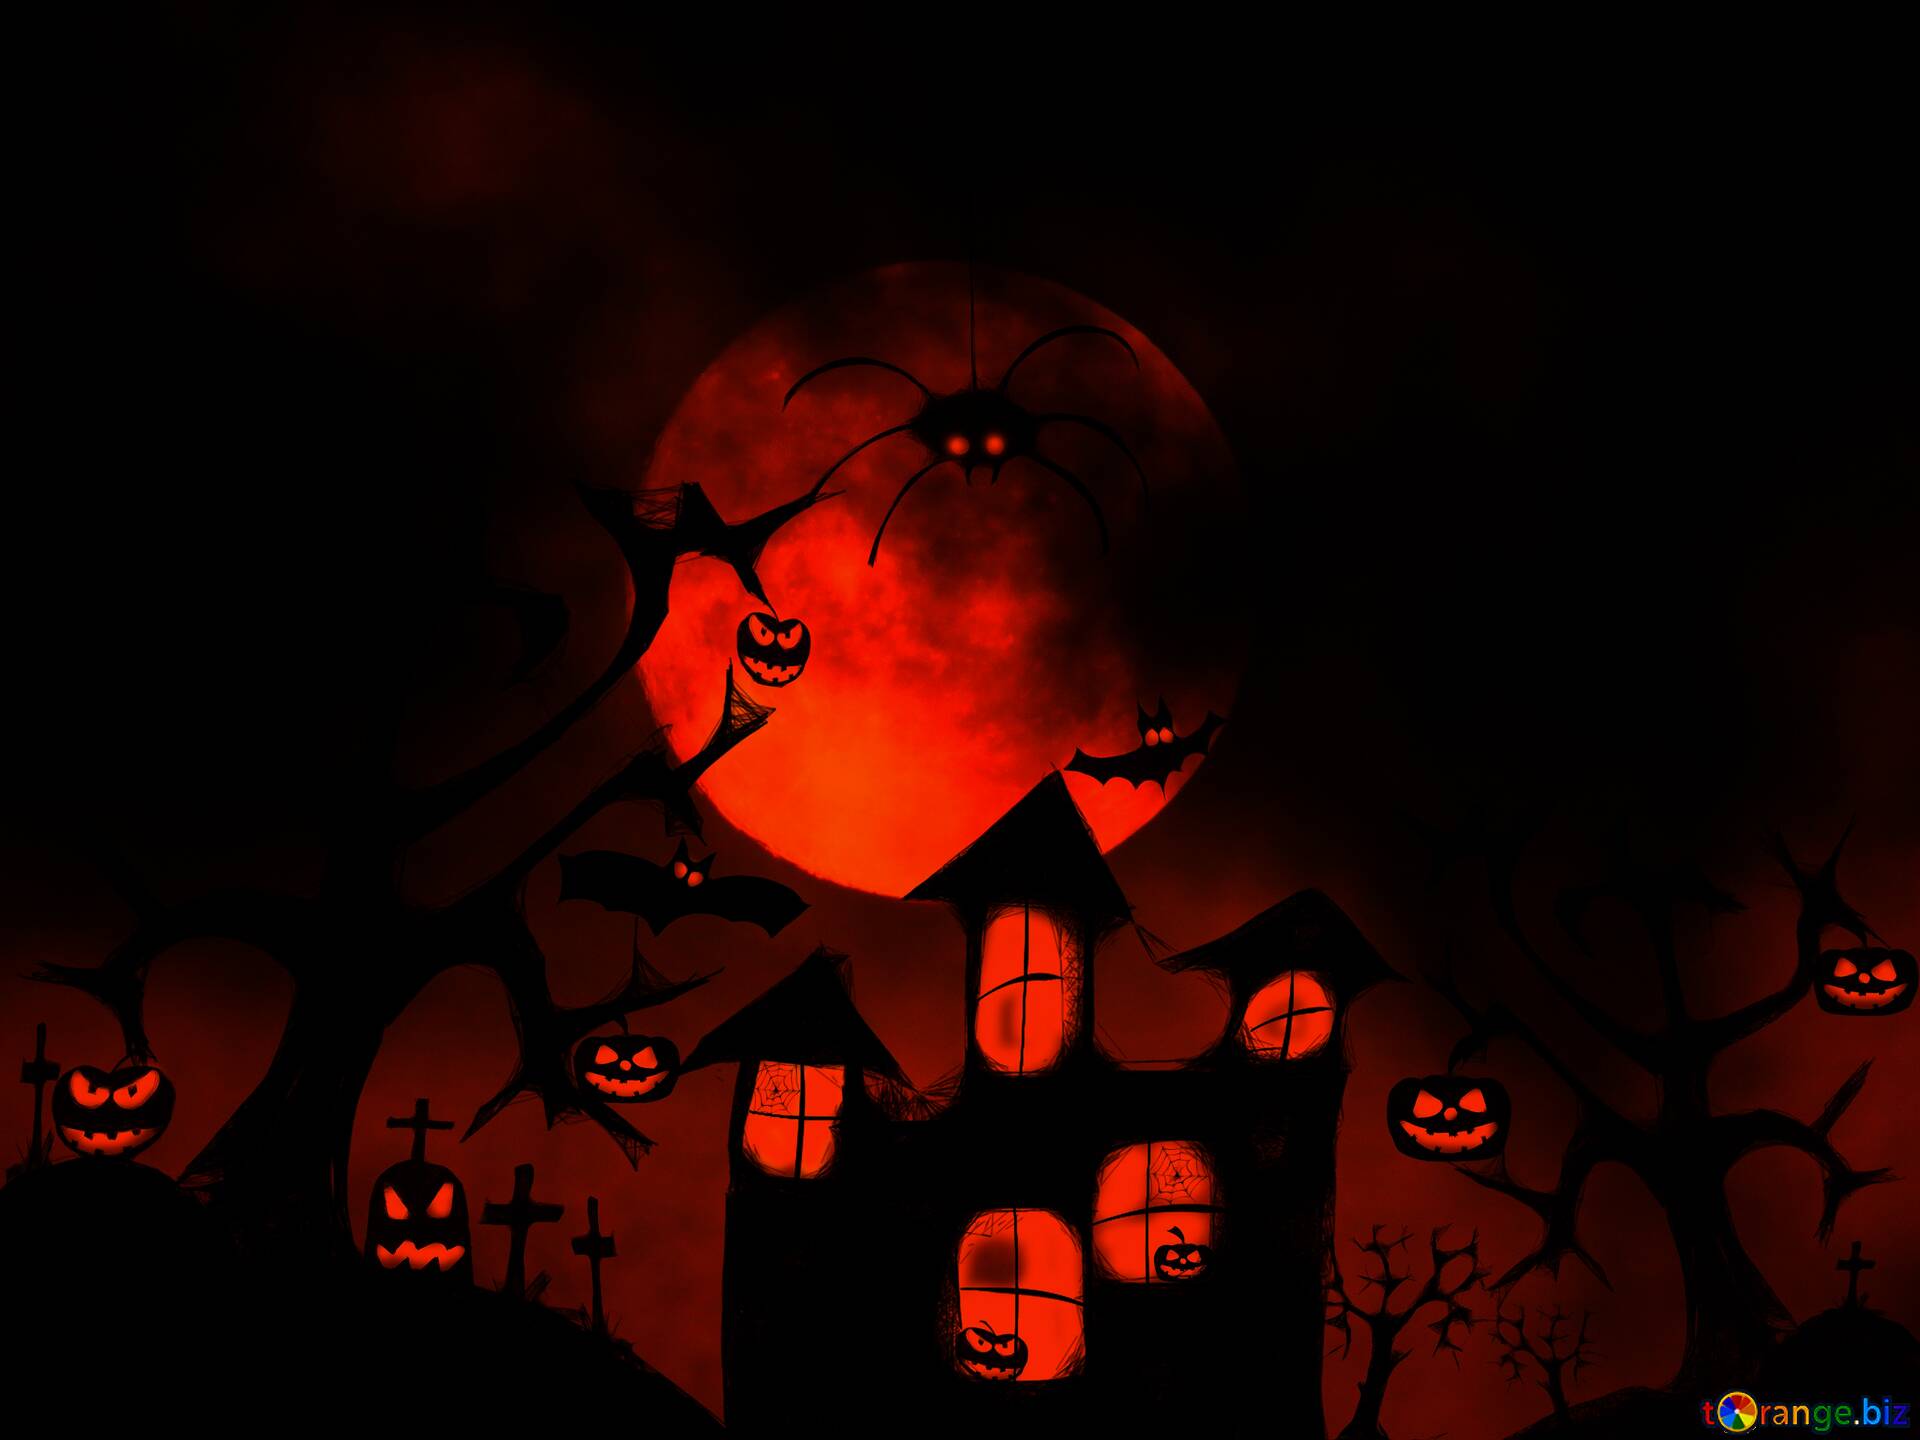 Download free picture Halloween wallpaper for desktop dark on CC-BY